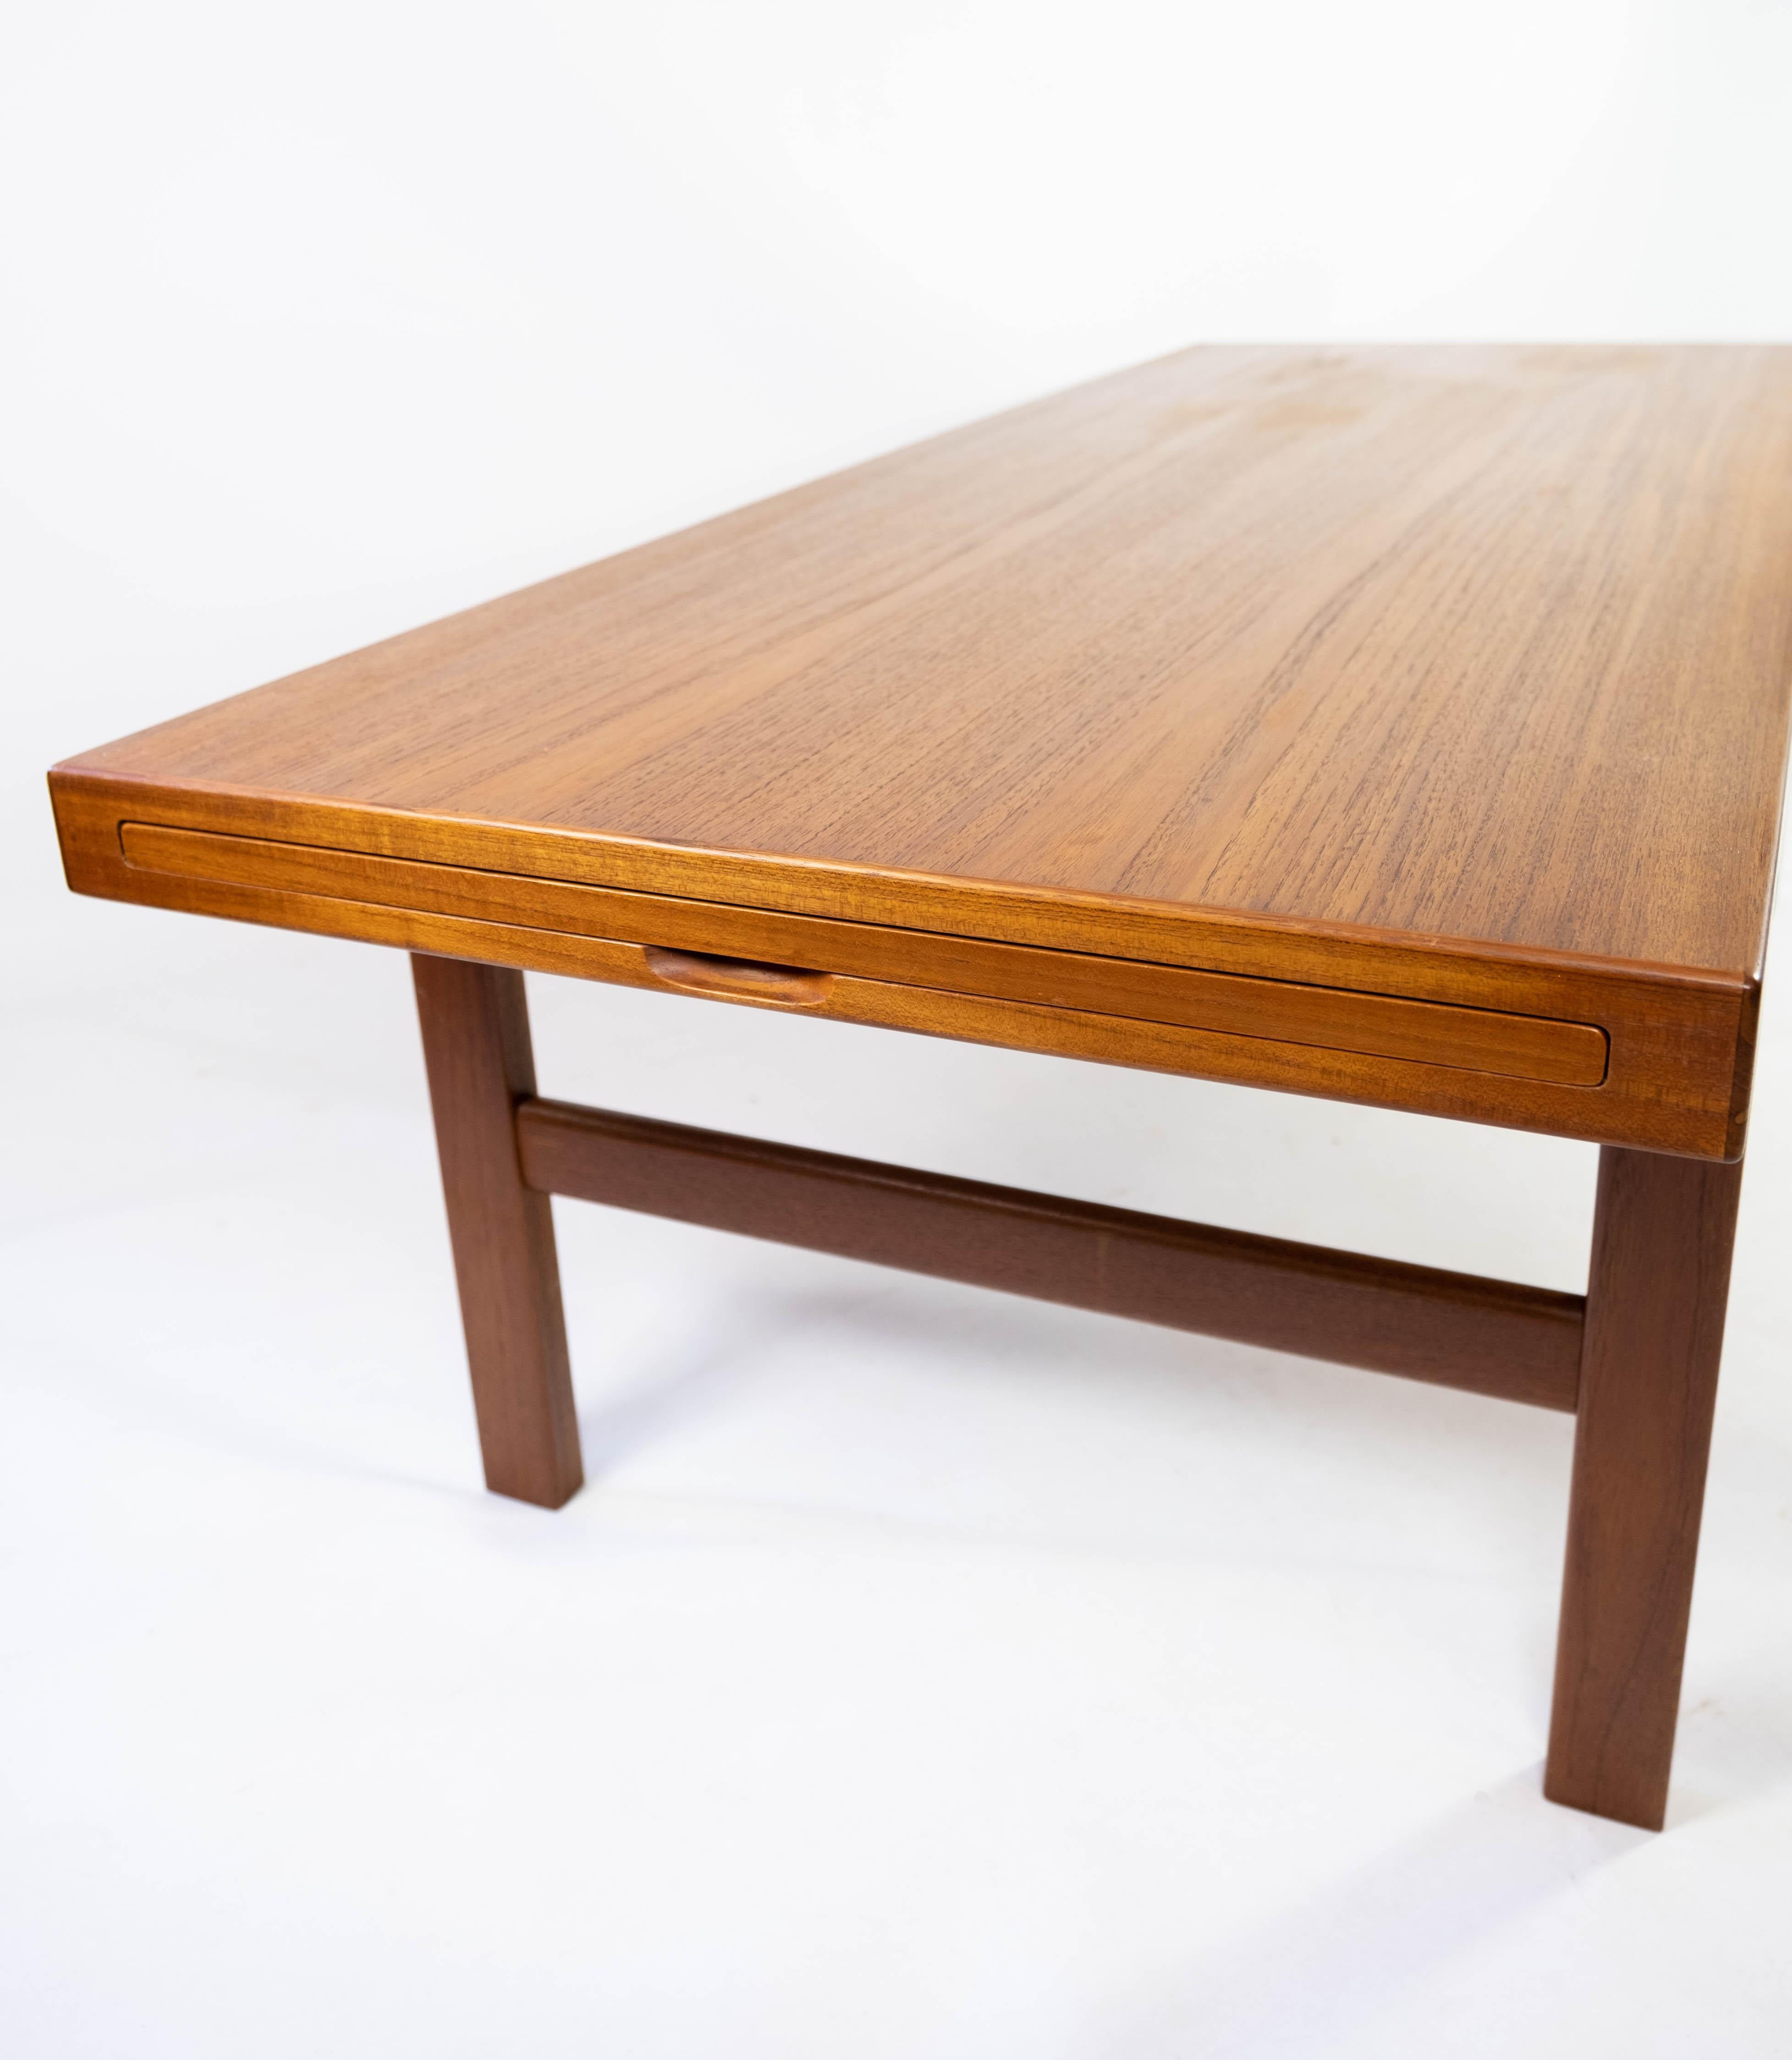 Mid-20th Century Coffee Table in Teak with Extension Plate of Danish Design from the 1960s